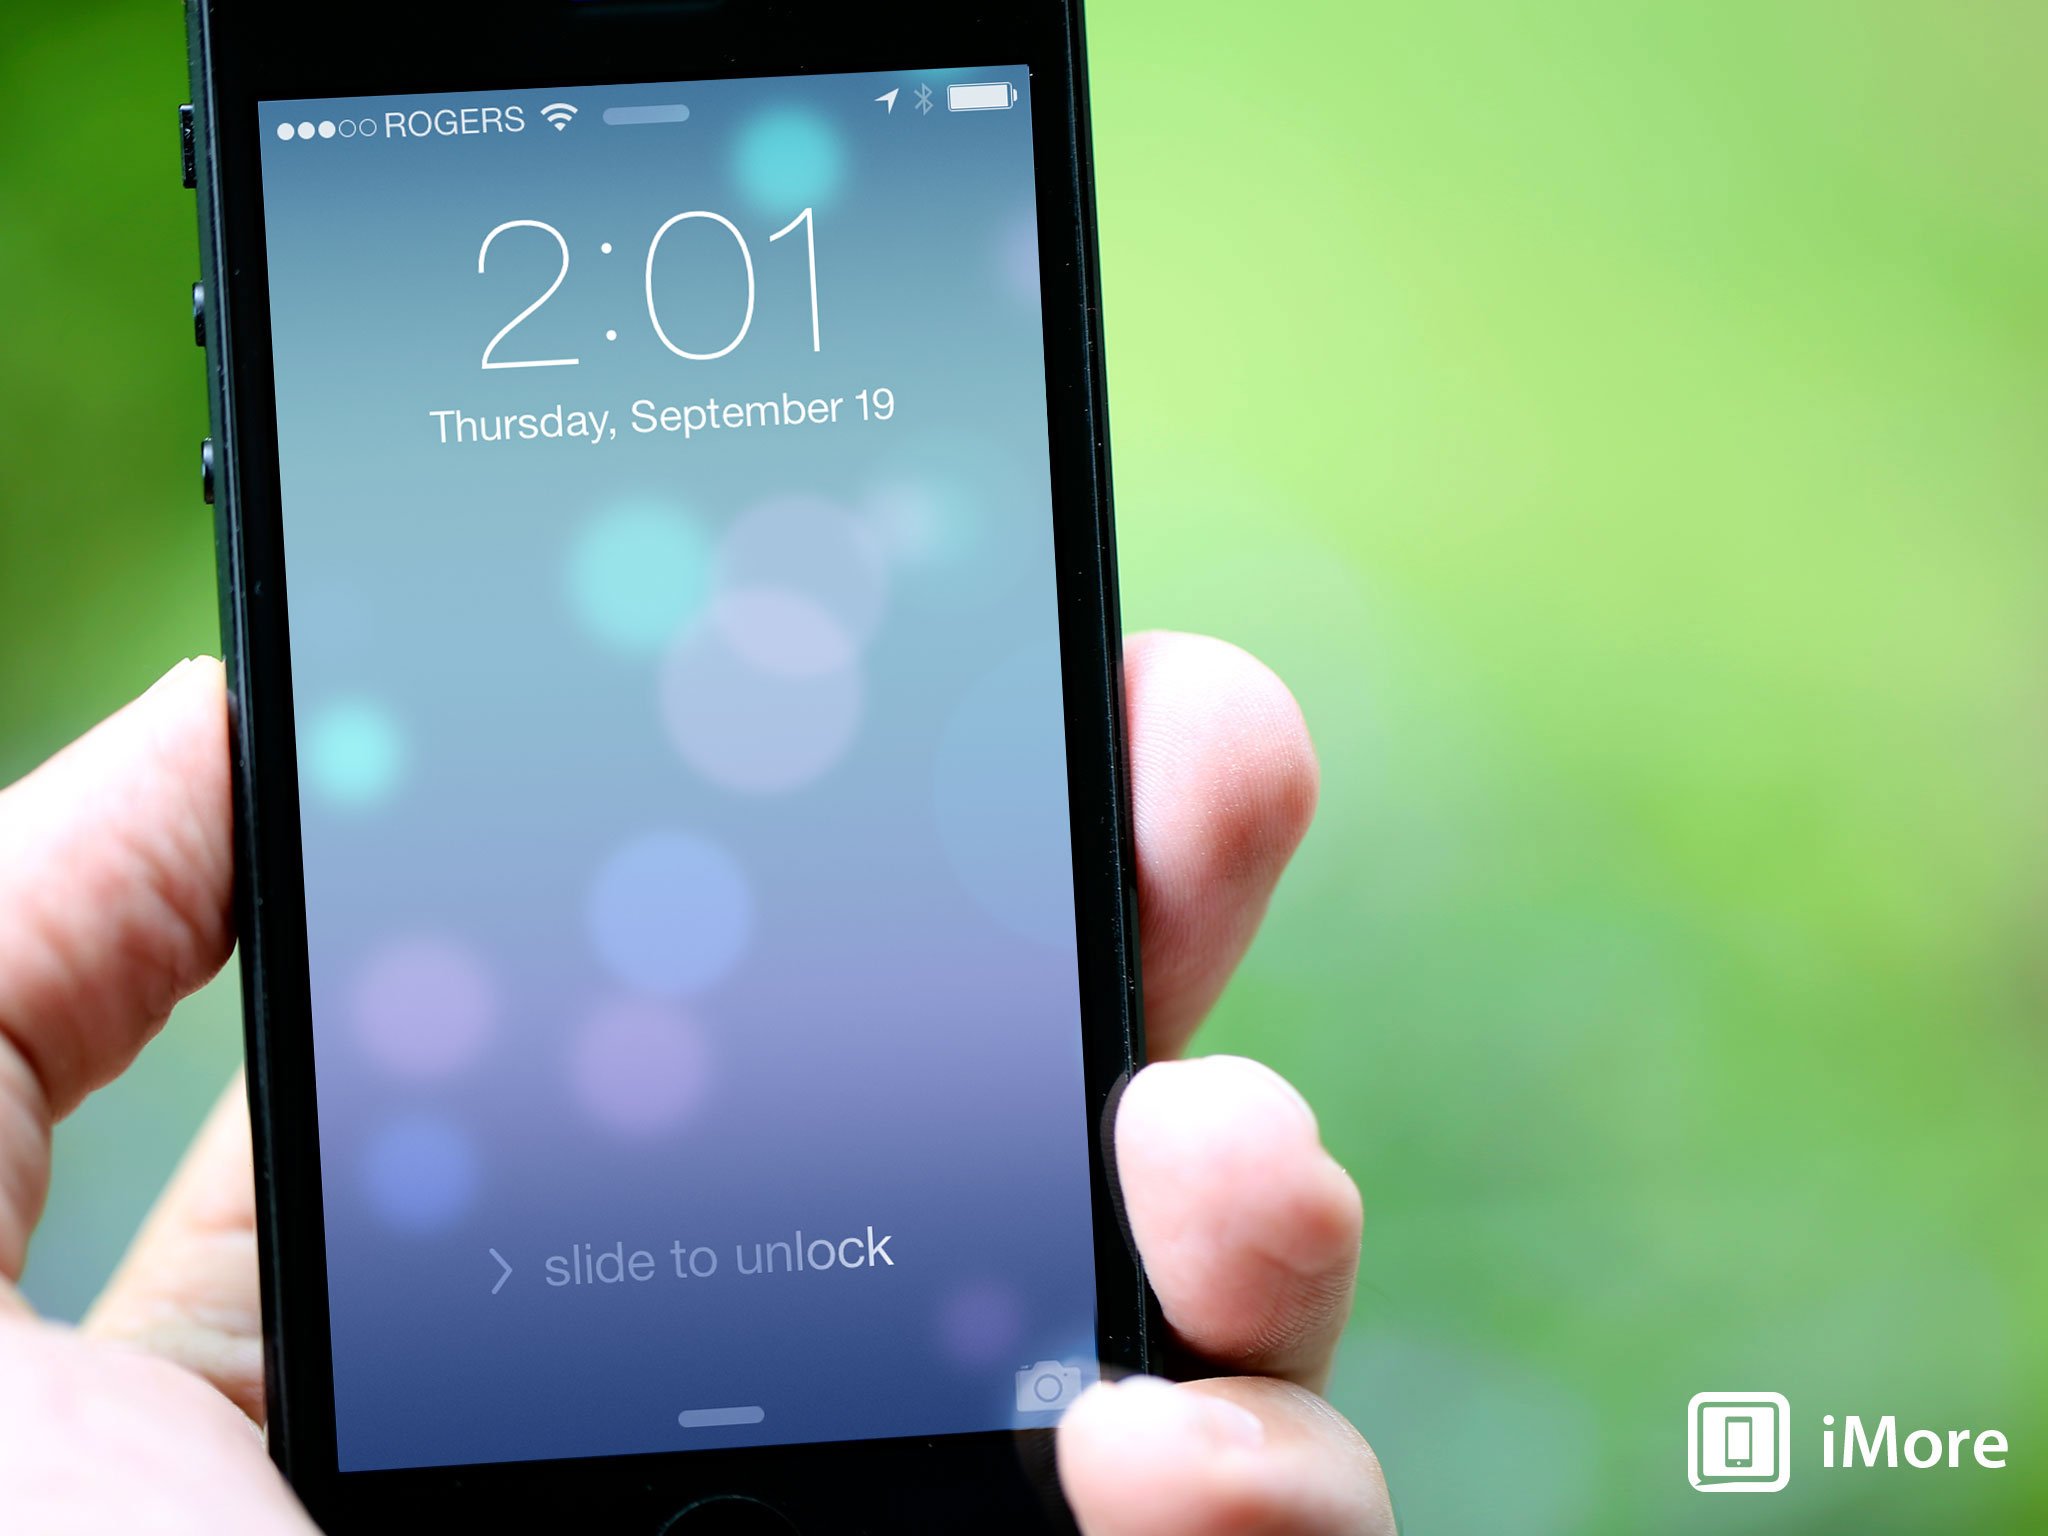 Curious about iOS 8 security? Apple's got a new white paper for that!